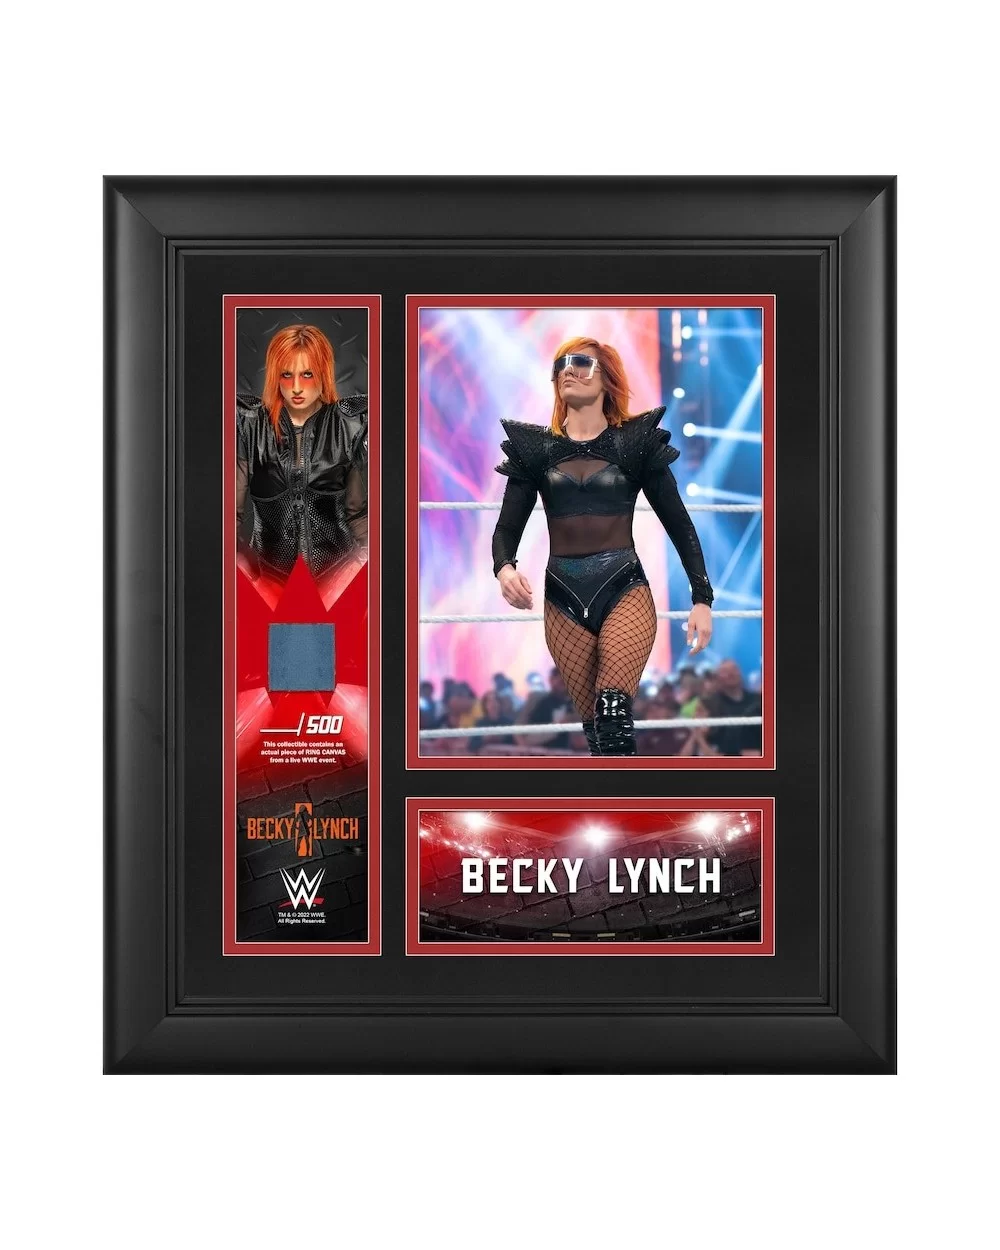 Becky Lynch Framed 15" x 17" Collage with a Piece of Match-Used Canvas - Limited Edition of 500 $19.04 Home & Office